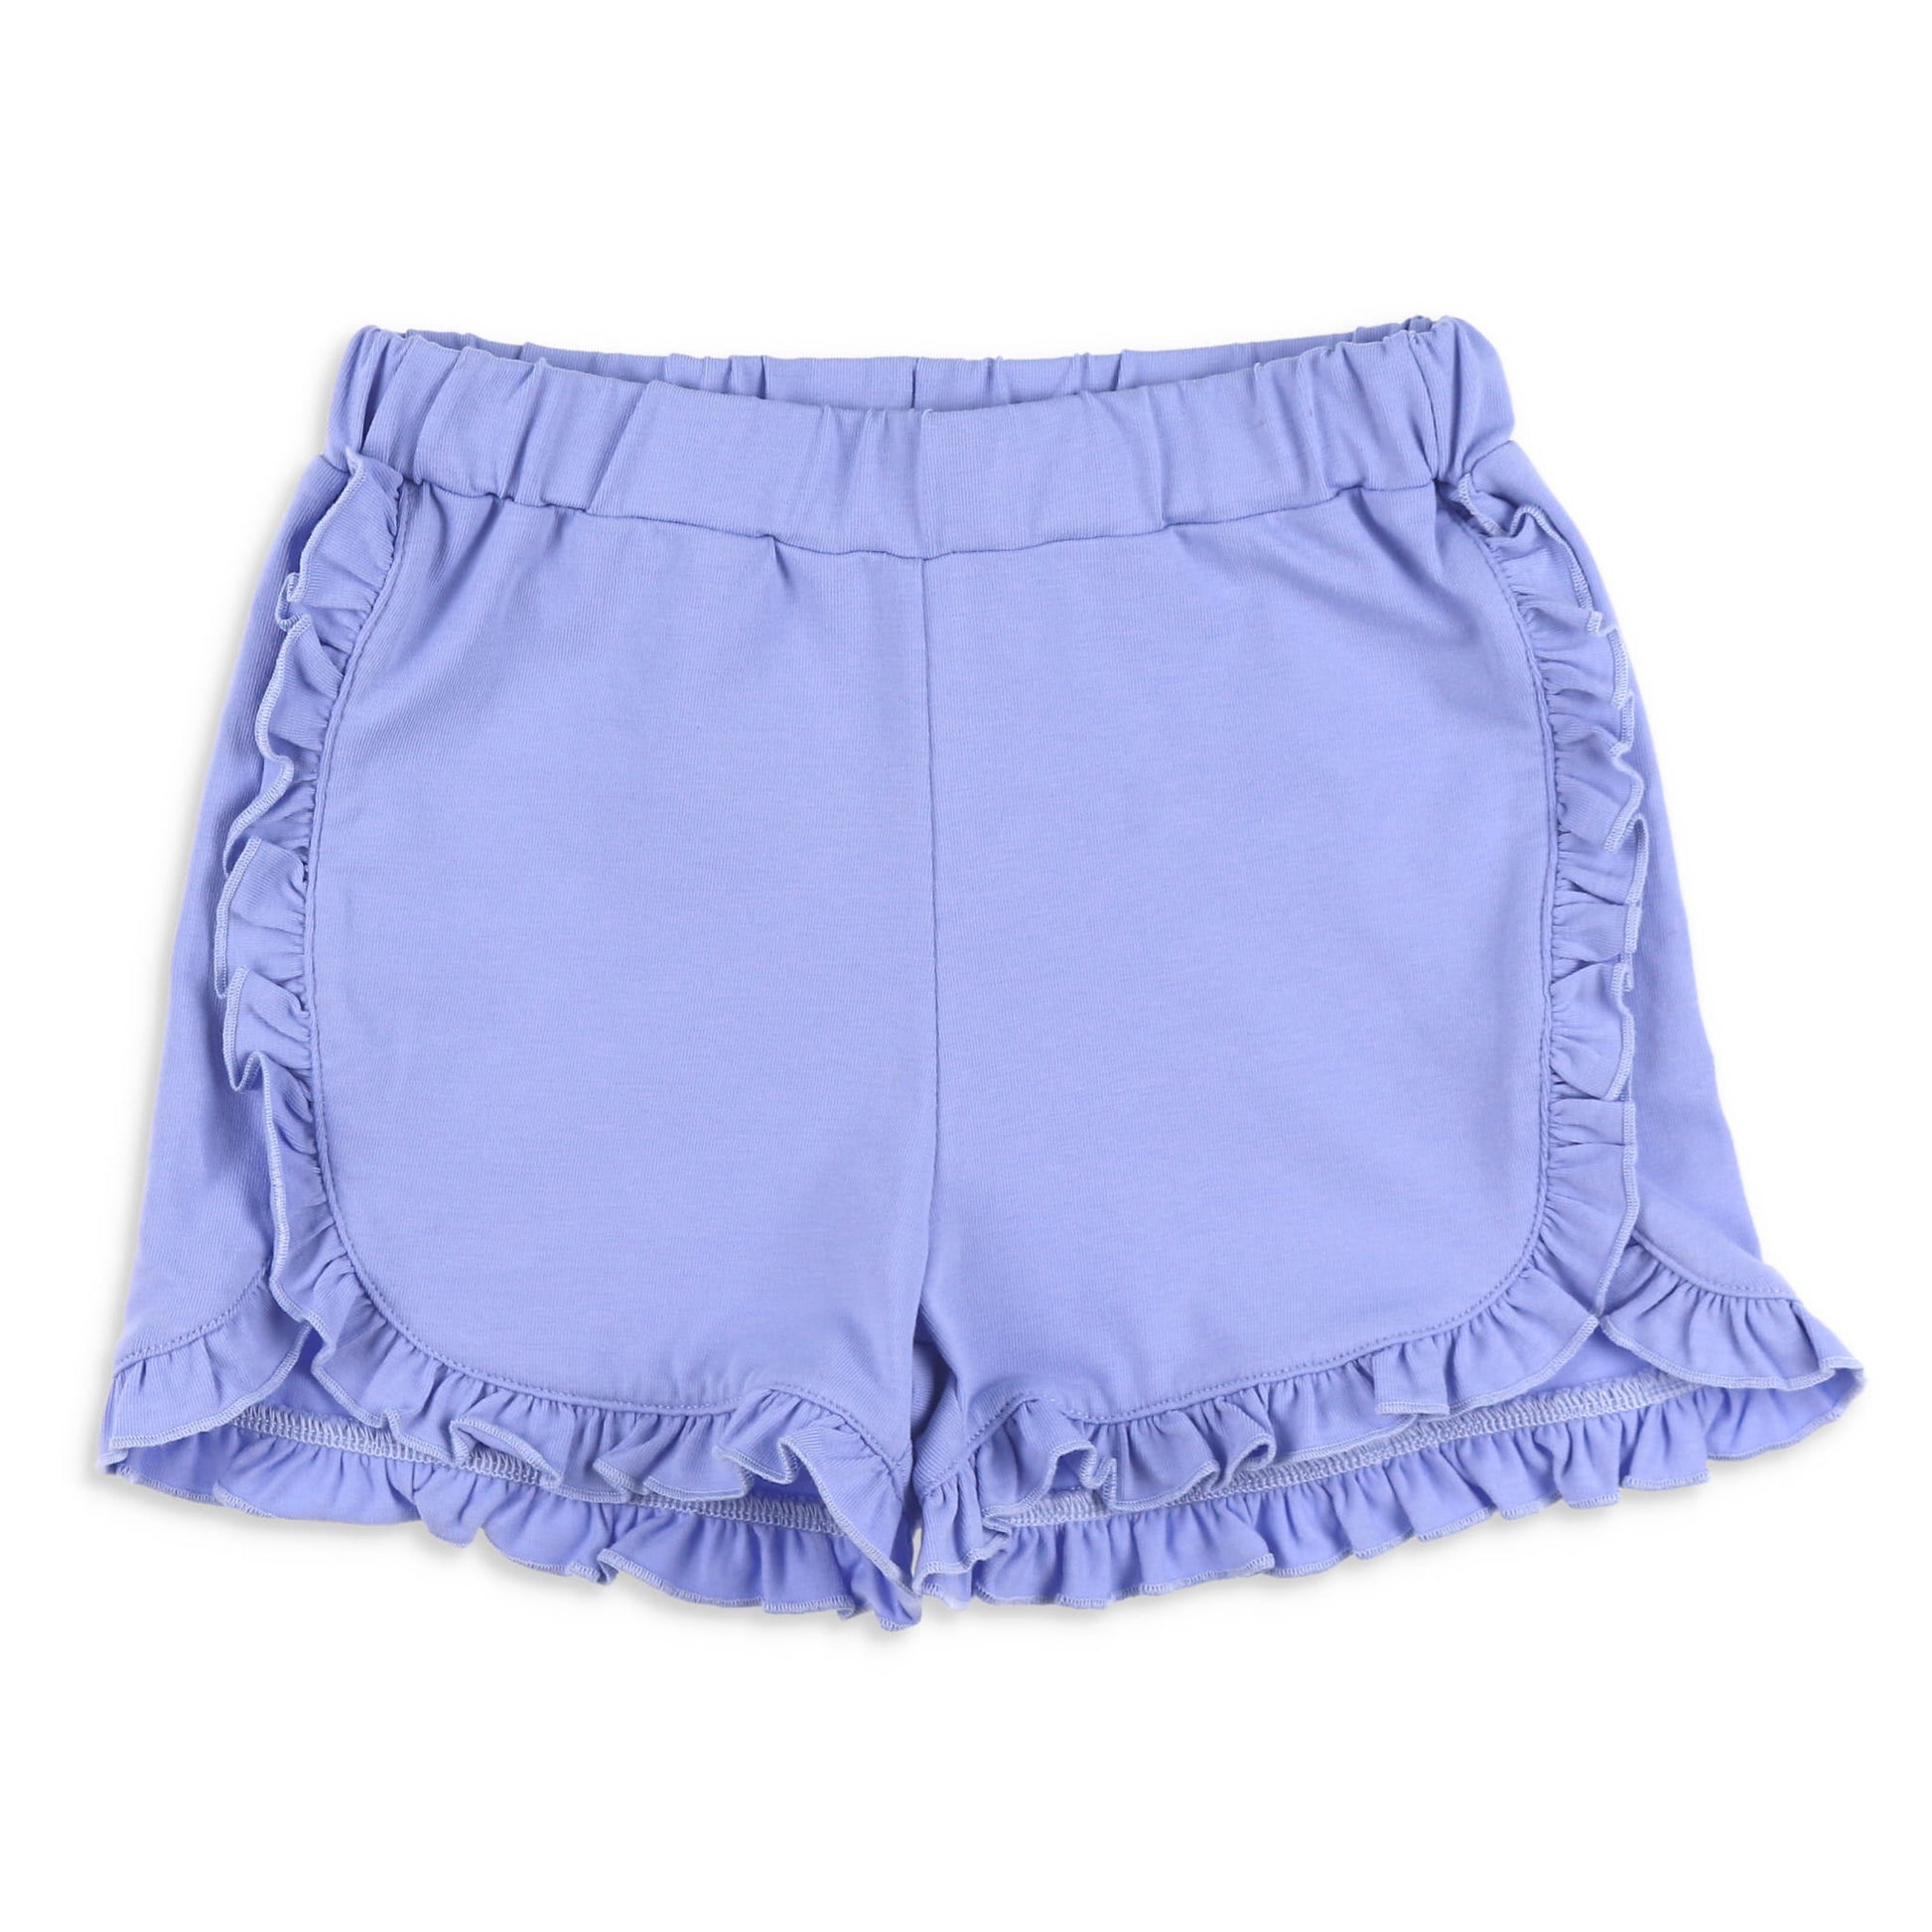 Girls Wisteria Shorts - Shrimp and Grits Kids